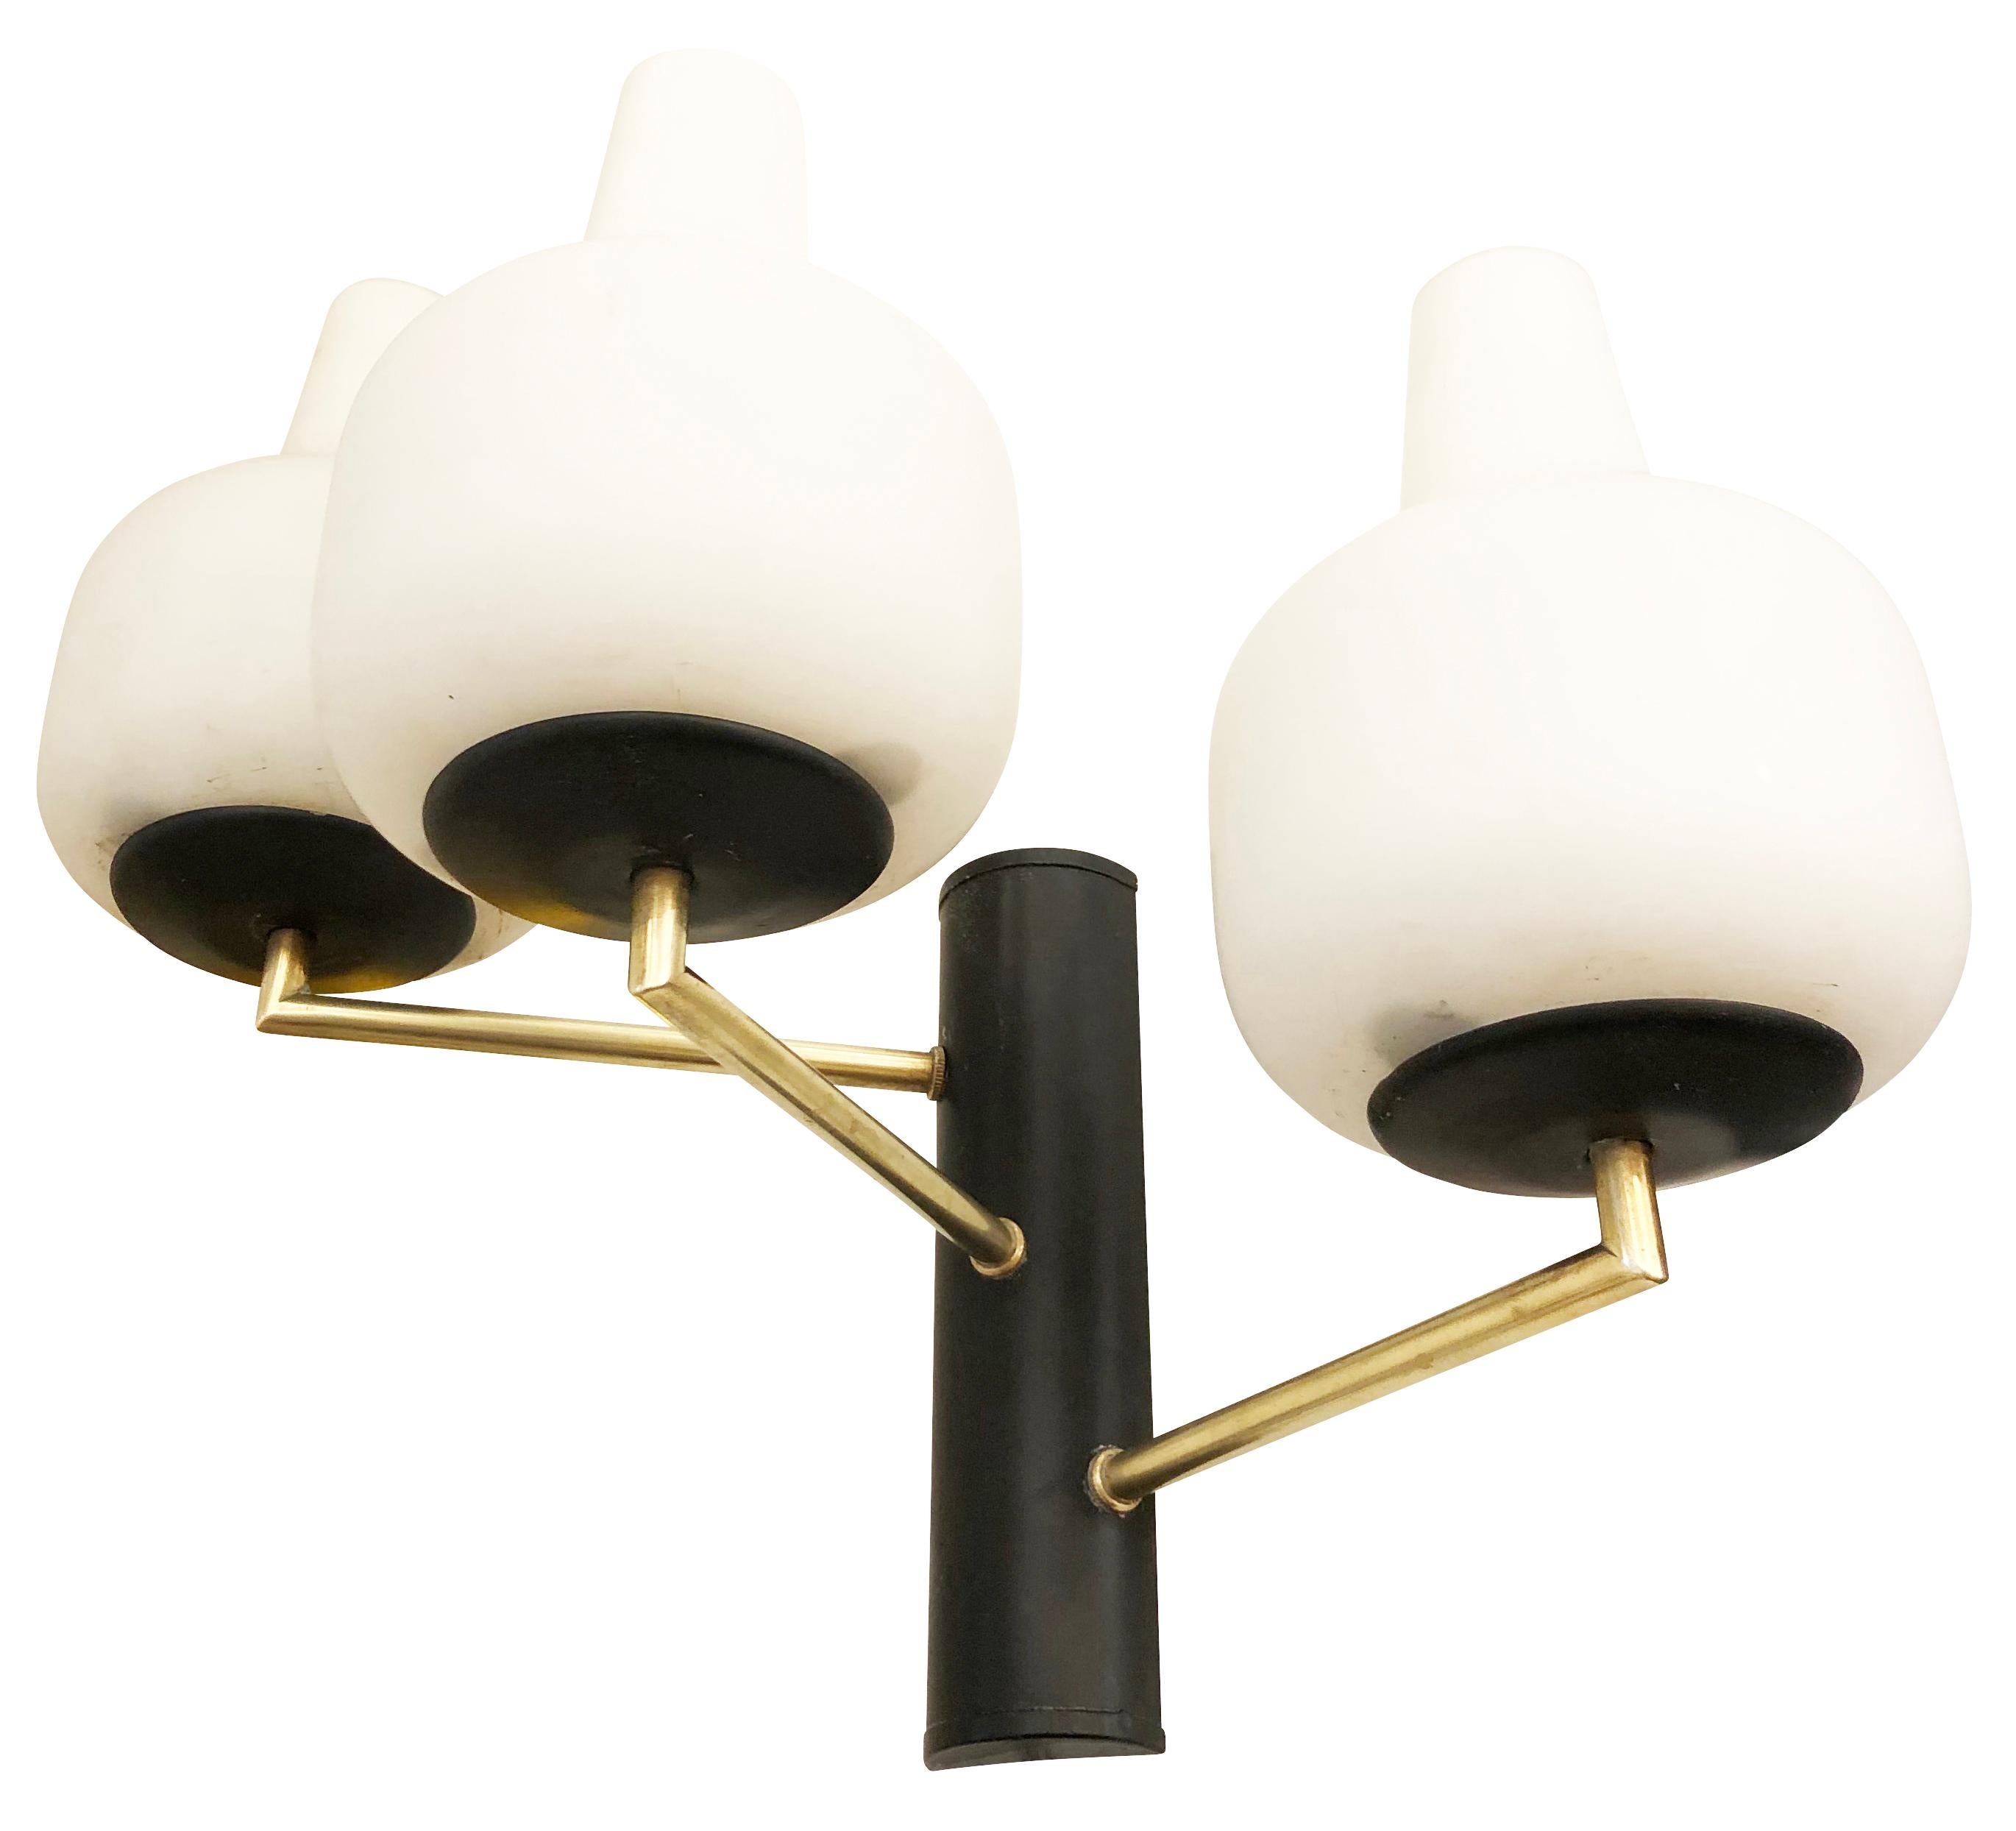 Pair of Stilnovo Style wall lights, each with three staggered frosted glass shades on a brass and black lacquered frame. Three candelabra bulbs per sconce.

Condition: Excellent vintage condition, minor wear consistent with age and use.

Measures: